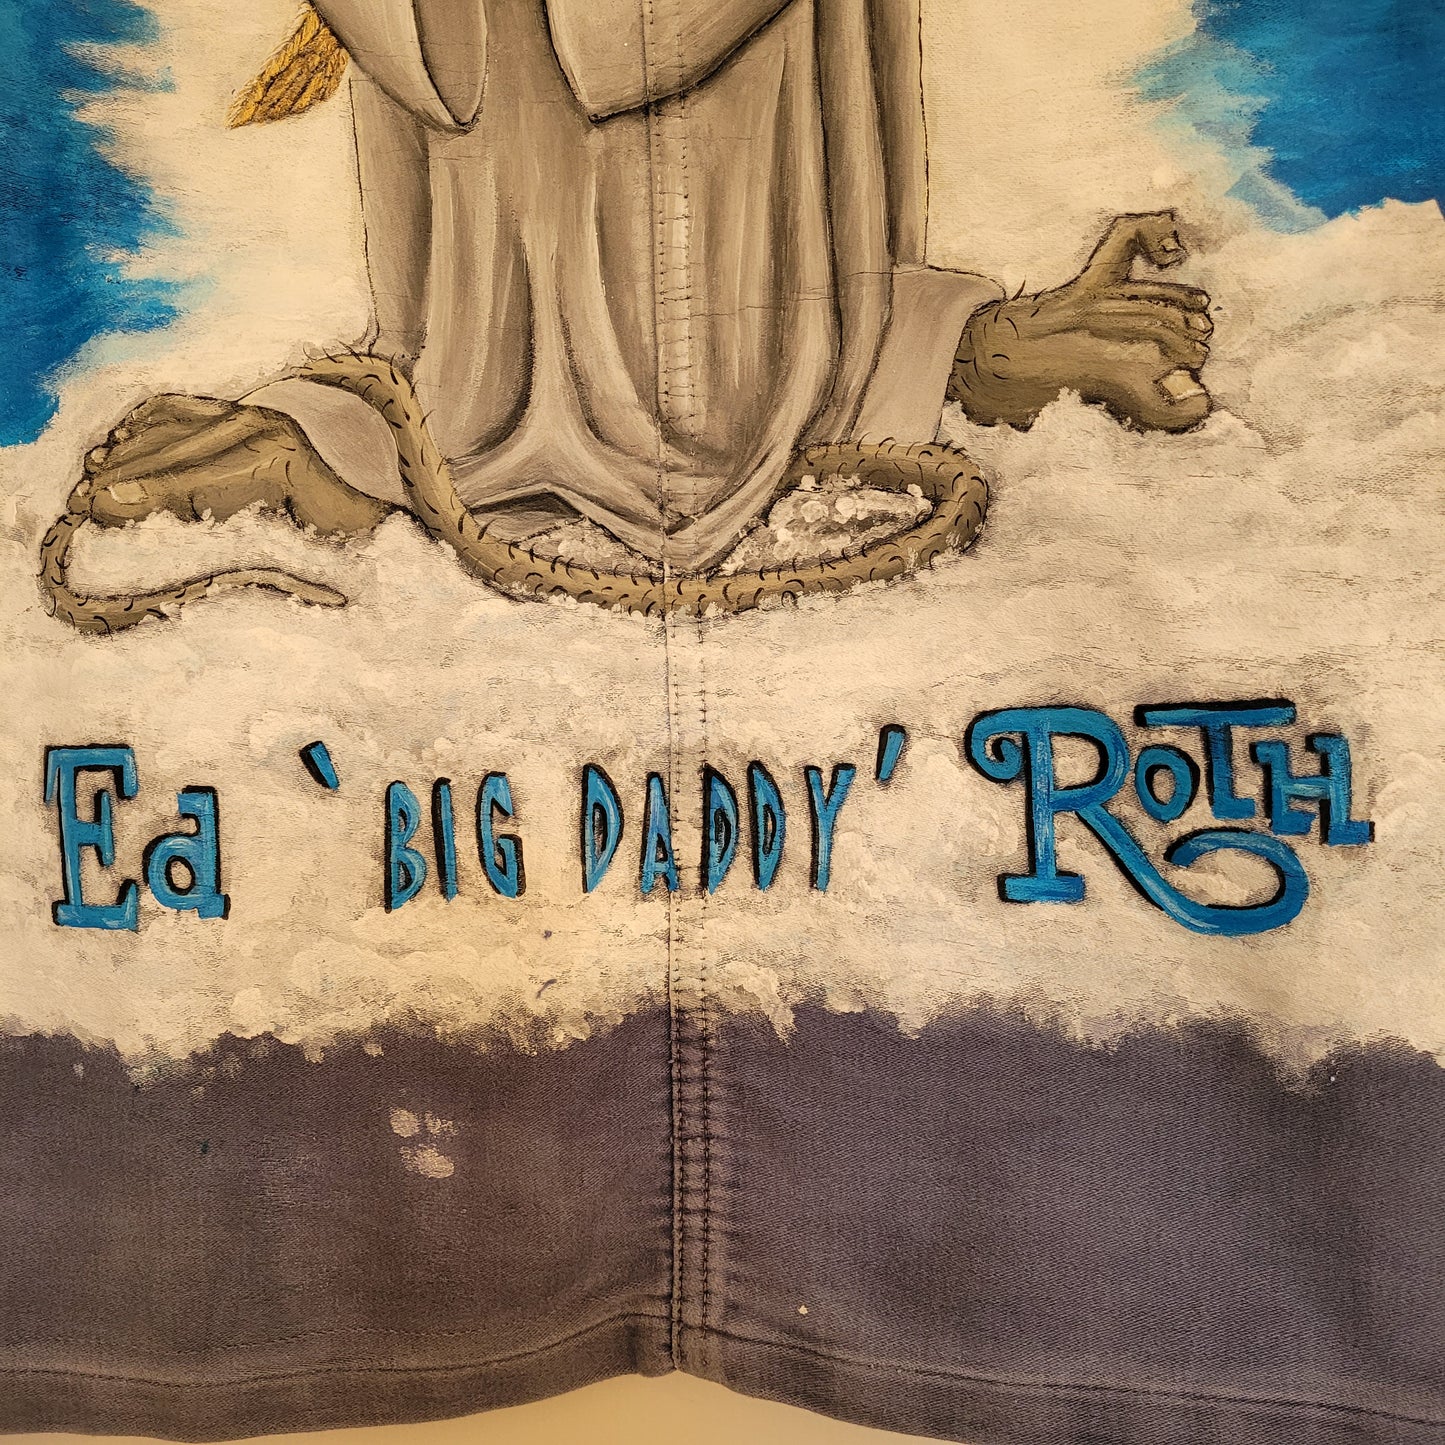 In loving memory of ED "Big Daddy" Roth handpainted french 50's moleskin jacket Rat Fink Angel